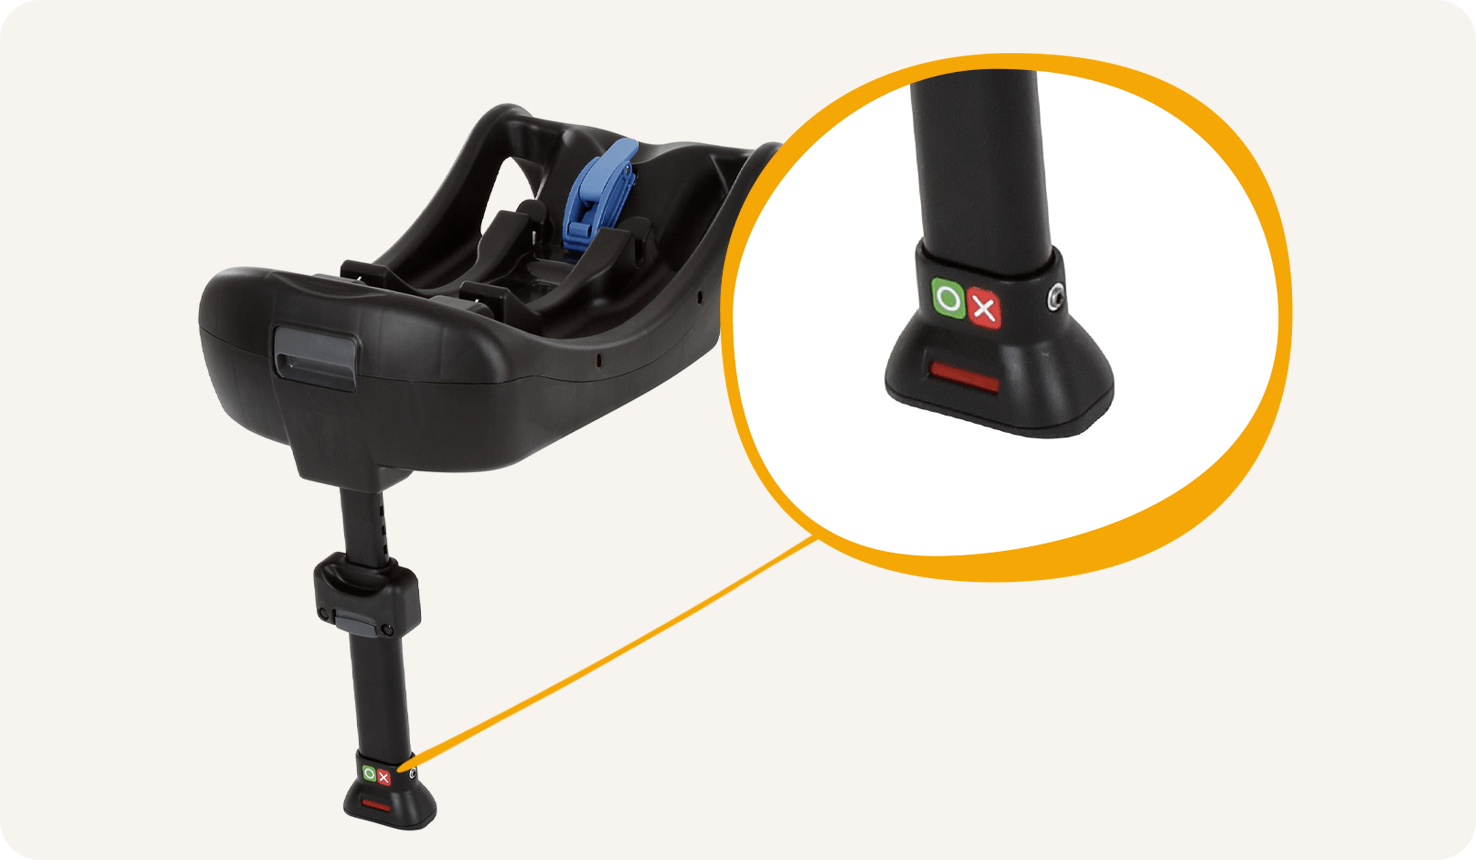  Joie clickFIT car seat base at an angle, with an inset closeup of the load leg installation indicator.